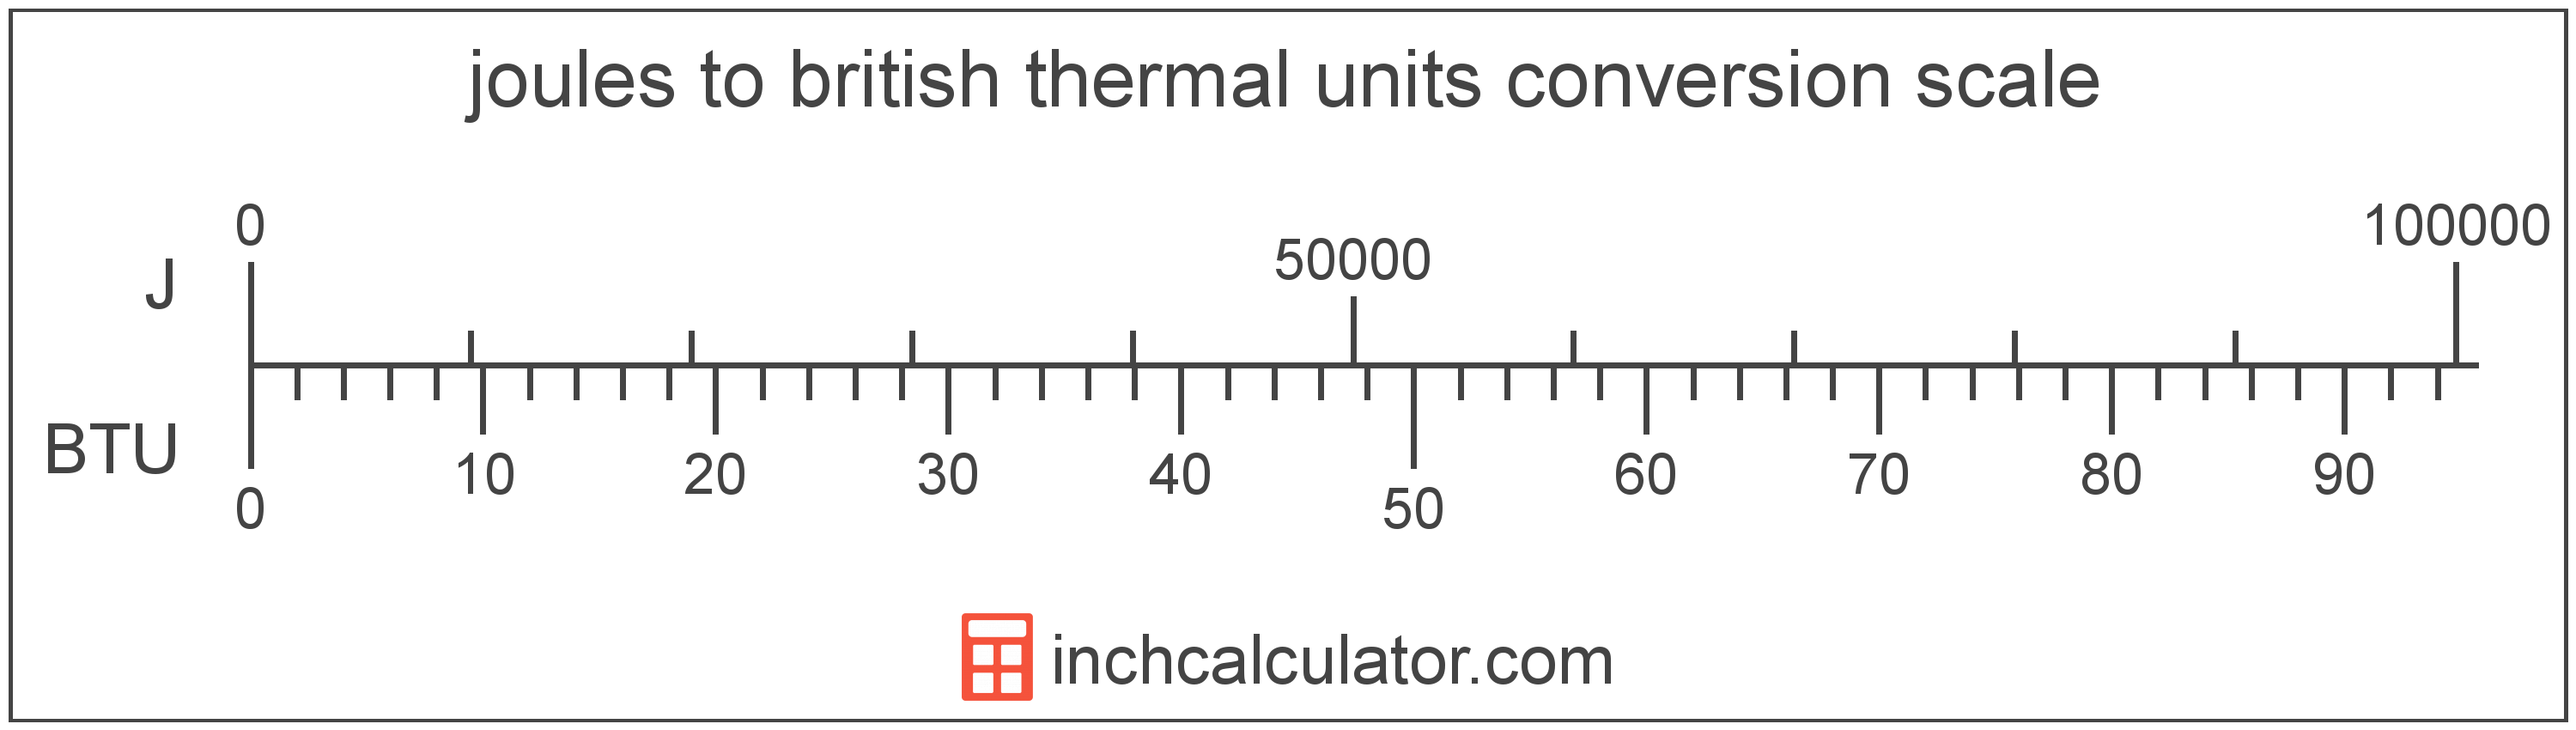 conversion scale showing british thermal units and equivalent joules energy values